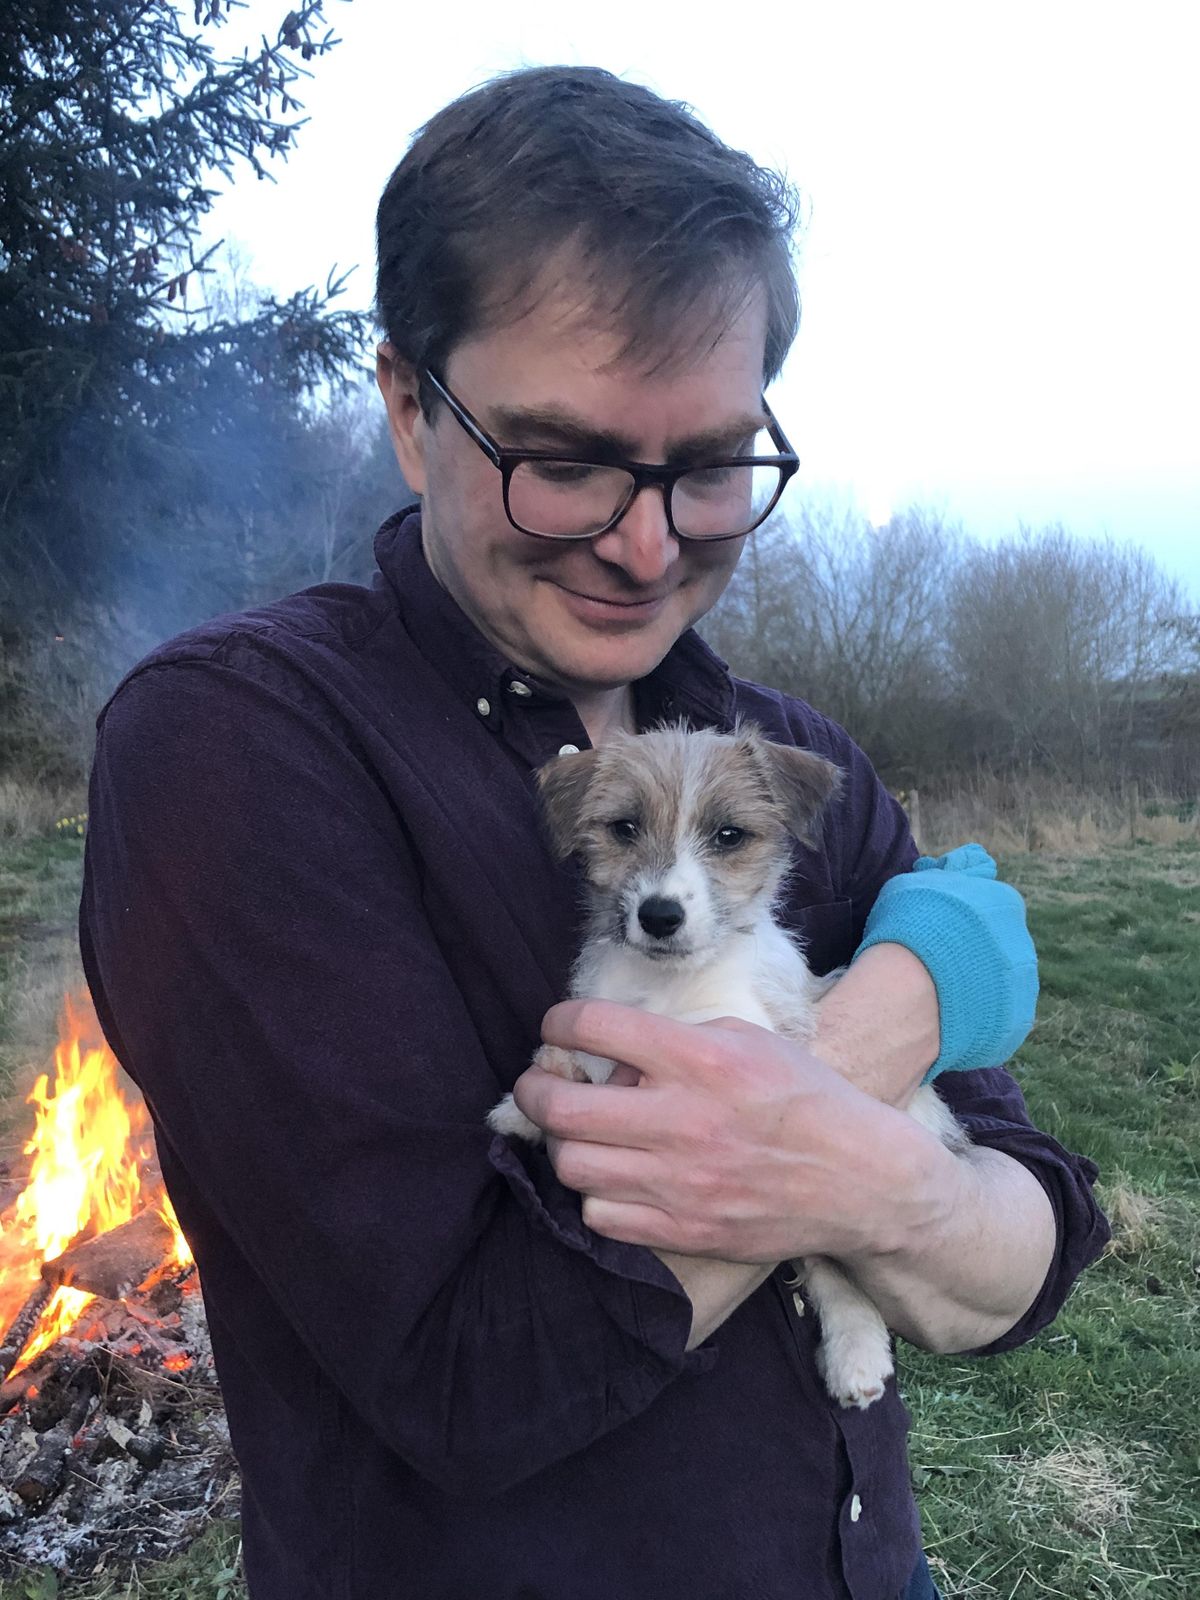 Spokane Symphony music director James Lowe is at home in Scotland during the coronavirus pandemic with his fiancee Charlotte and new puppy Humphrey. (Courtesy of James Lowe)